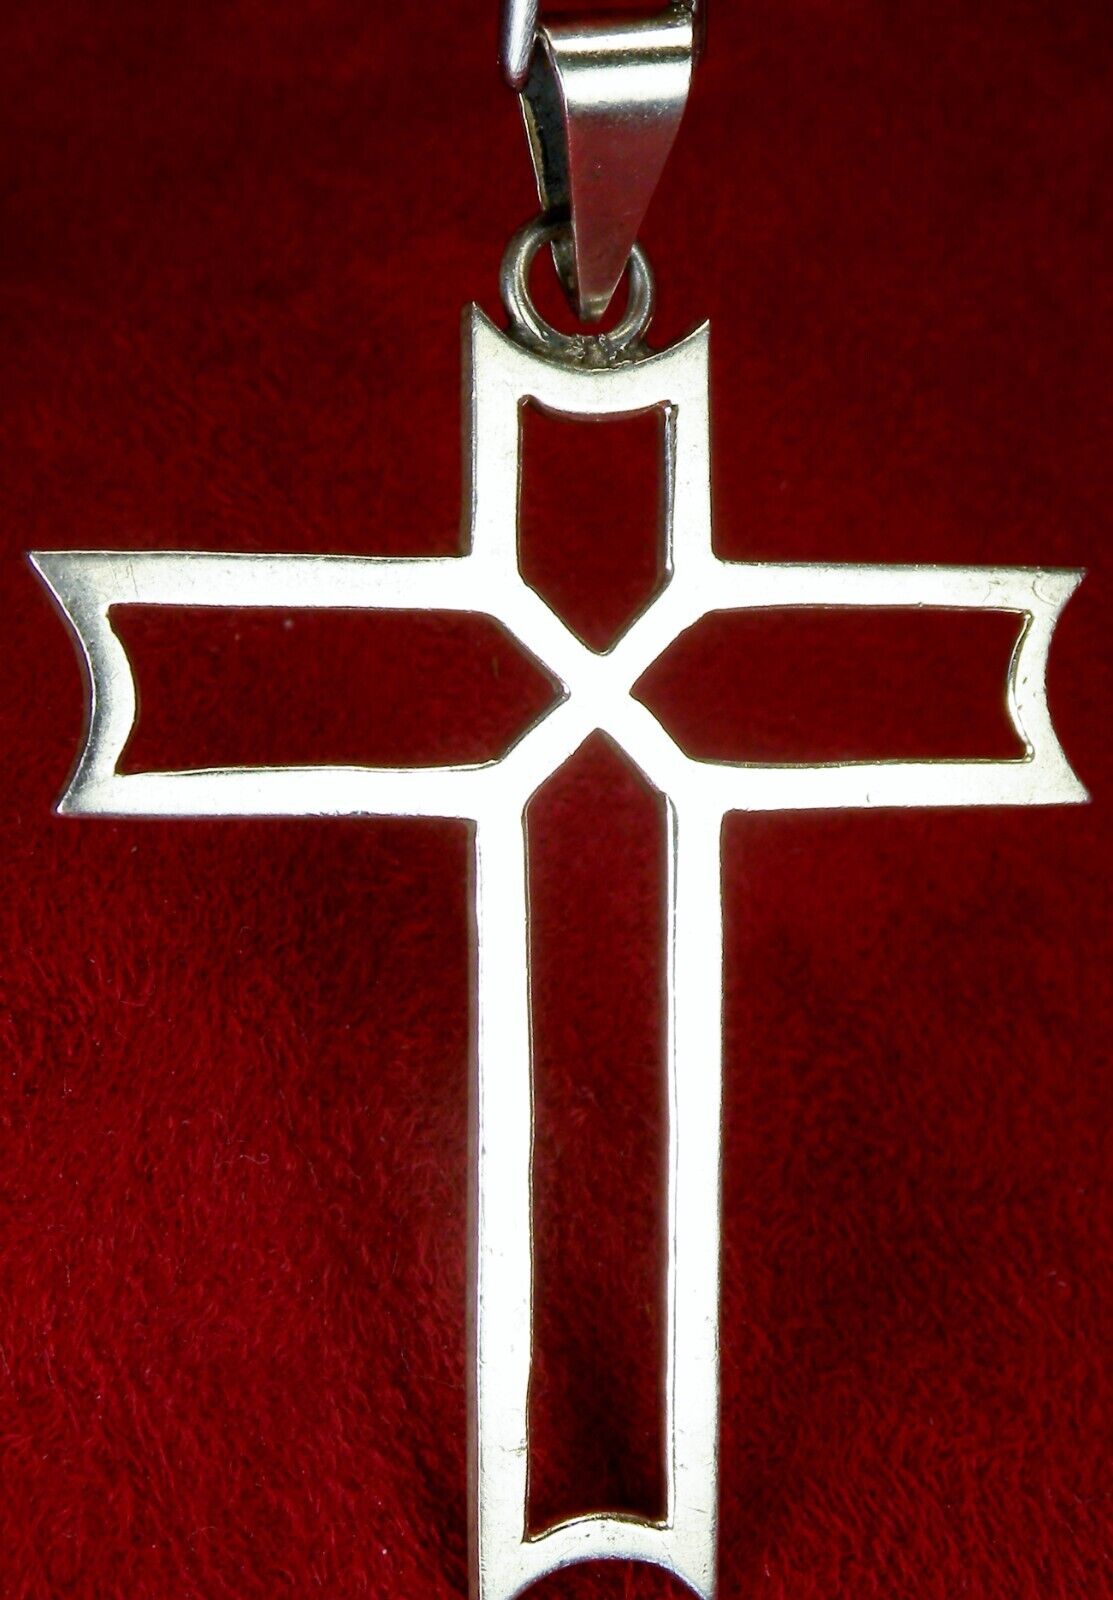 Bishop’s RARE Mexico Guadalupe Shrine Pilgrimage Sterling Silver Cross Pendant